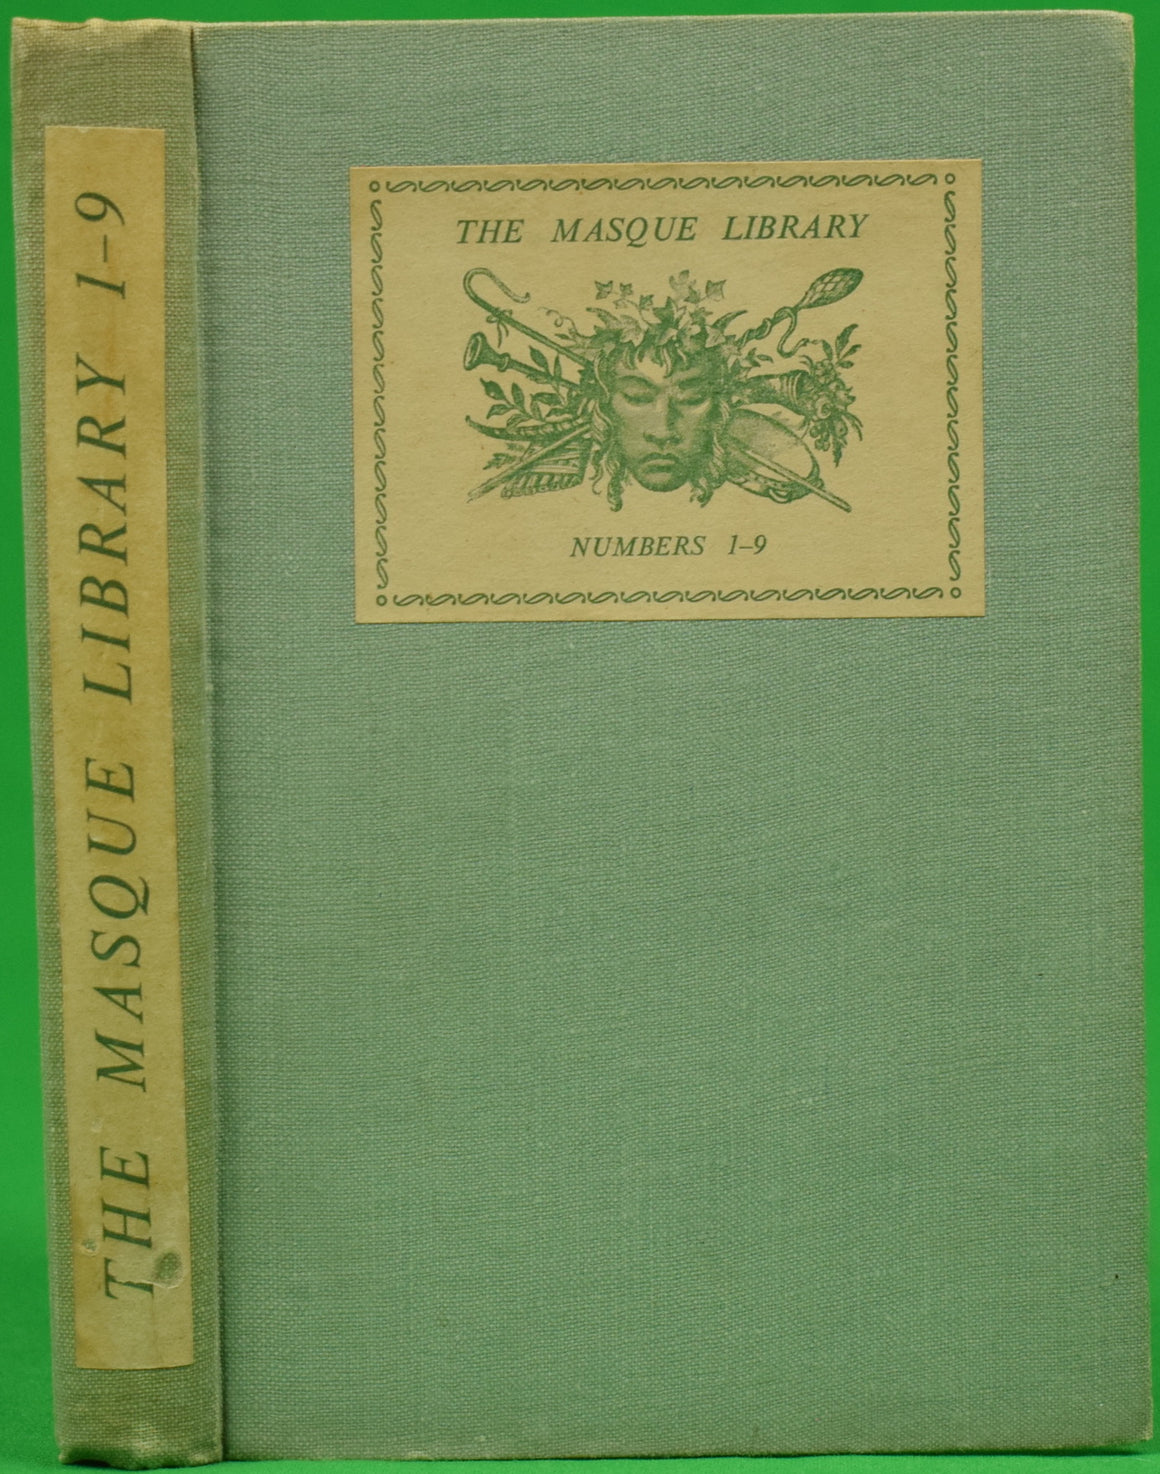 The Masque Library: Numbers 1-9